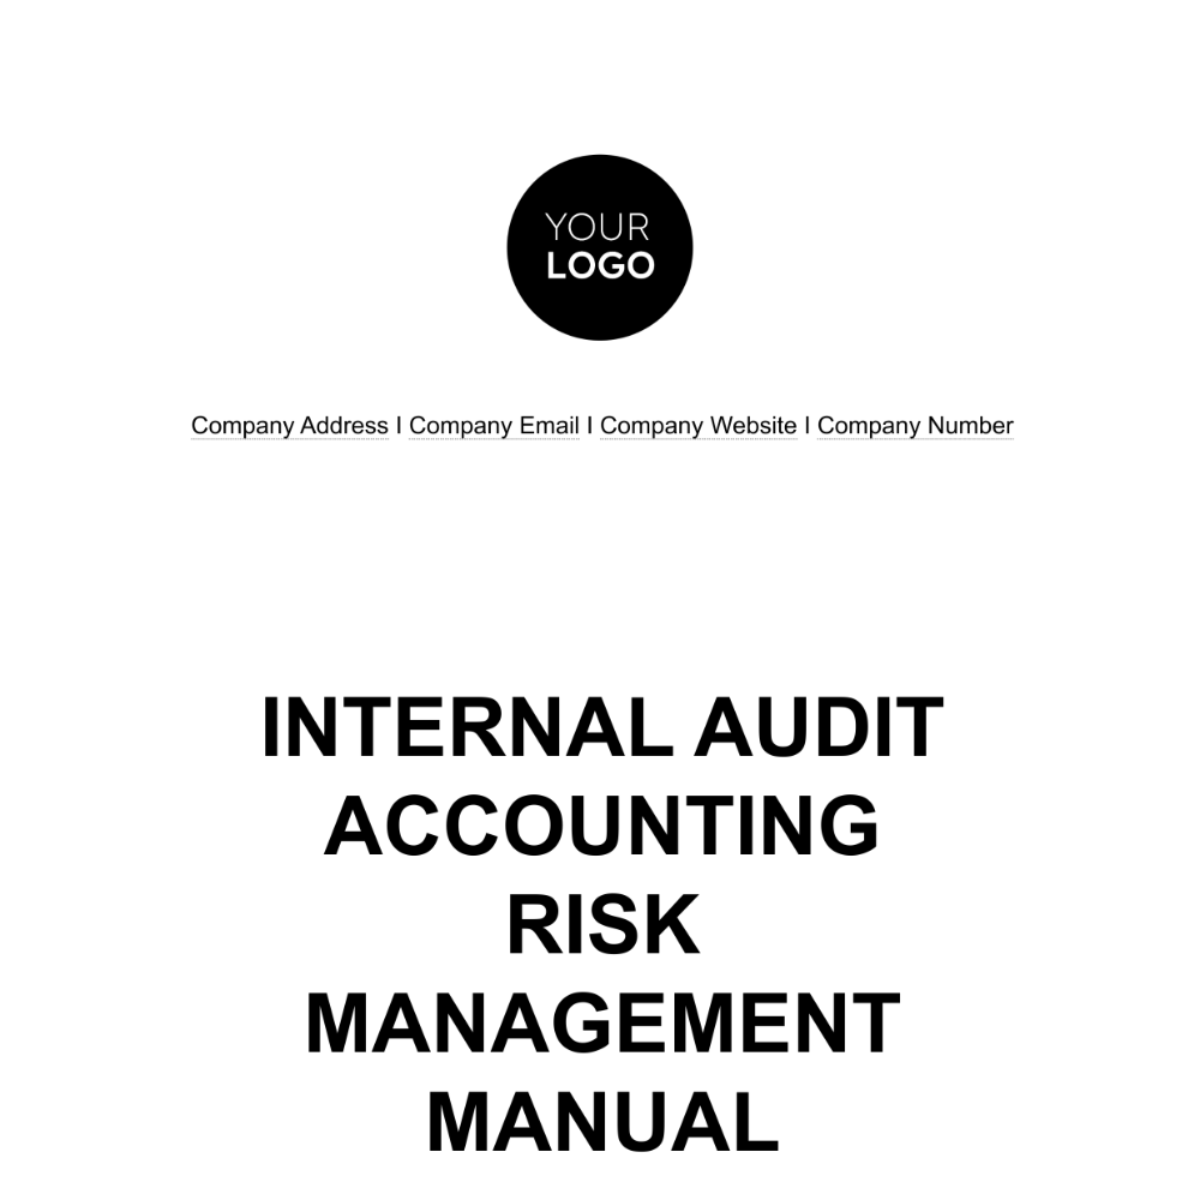 Internal Audit Accounting Risk Management Manual Template